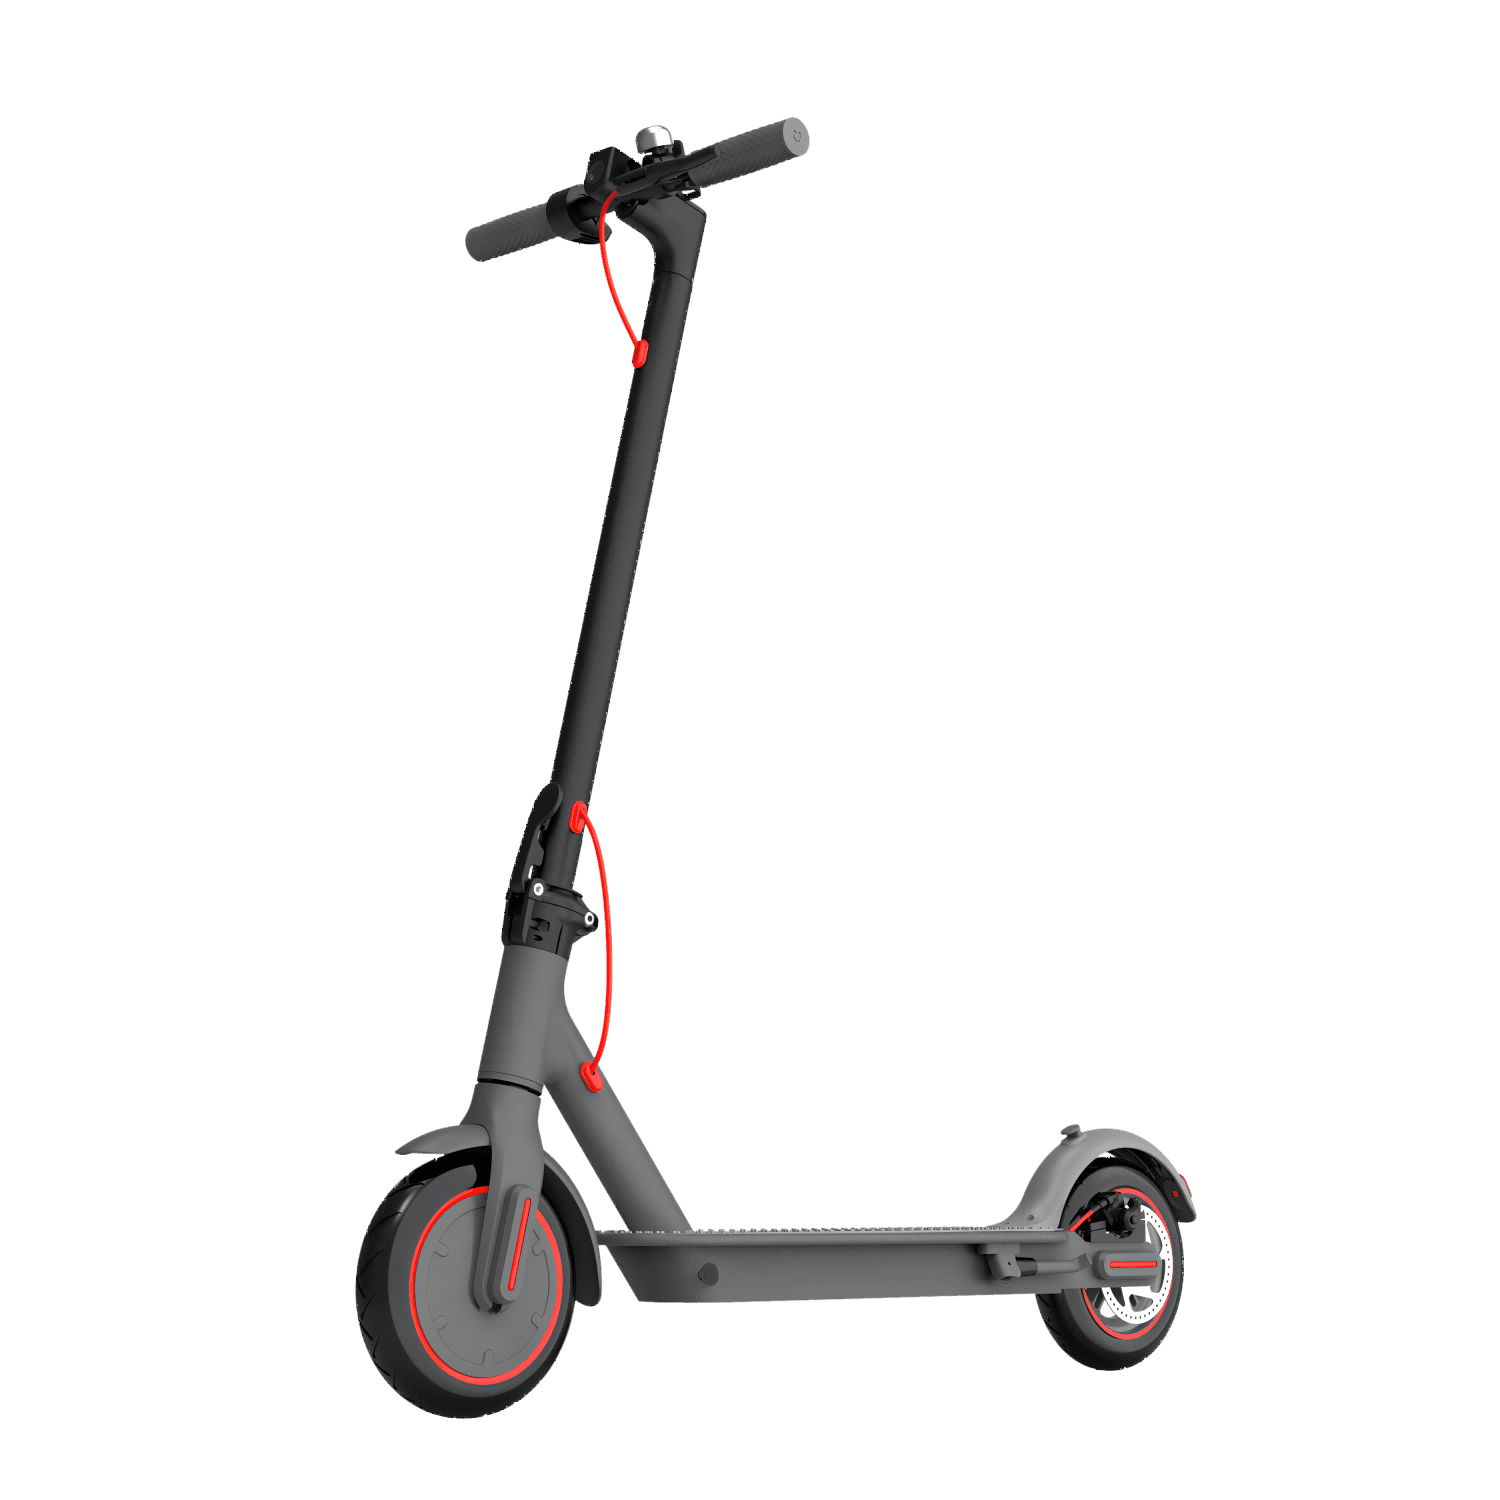 Ridefaboard T4 Max Pro Electric Scooter 500W Motor, Front Suspension